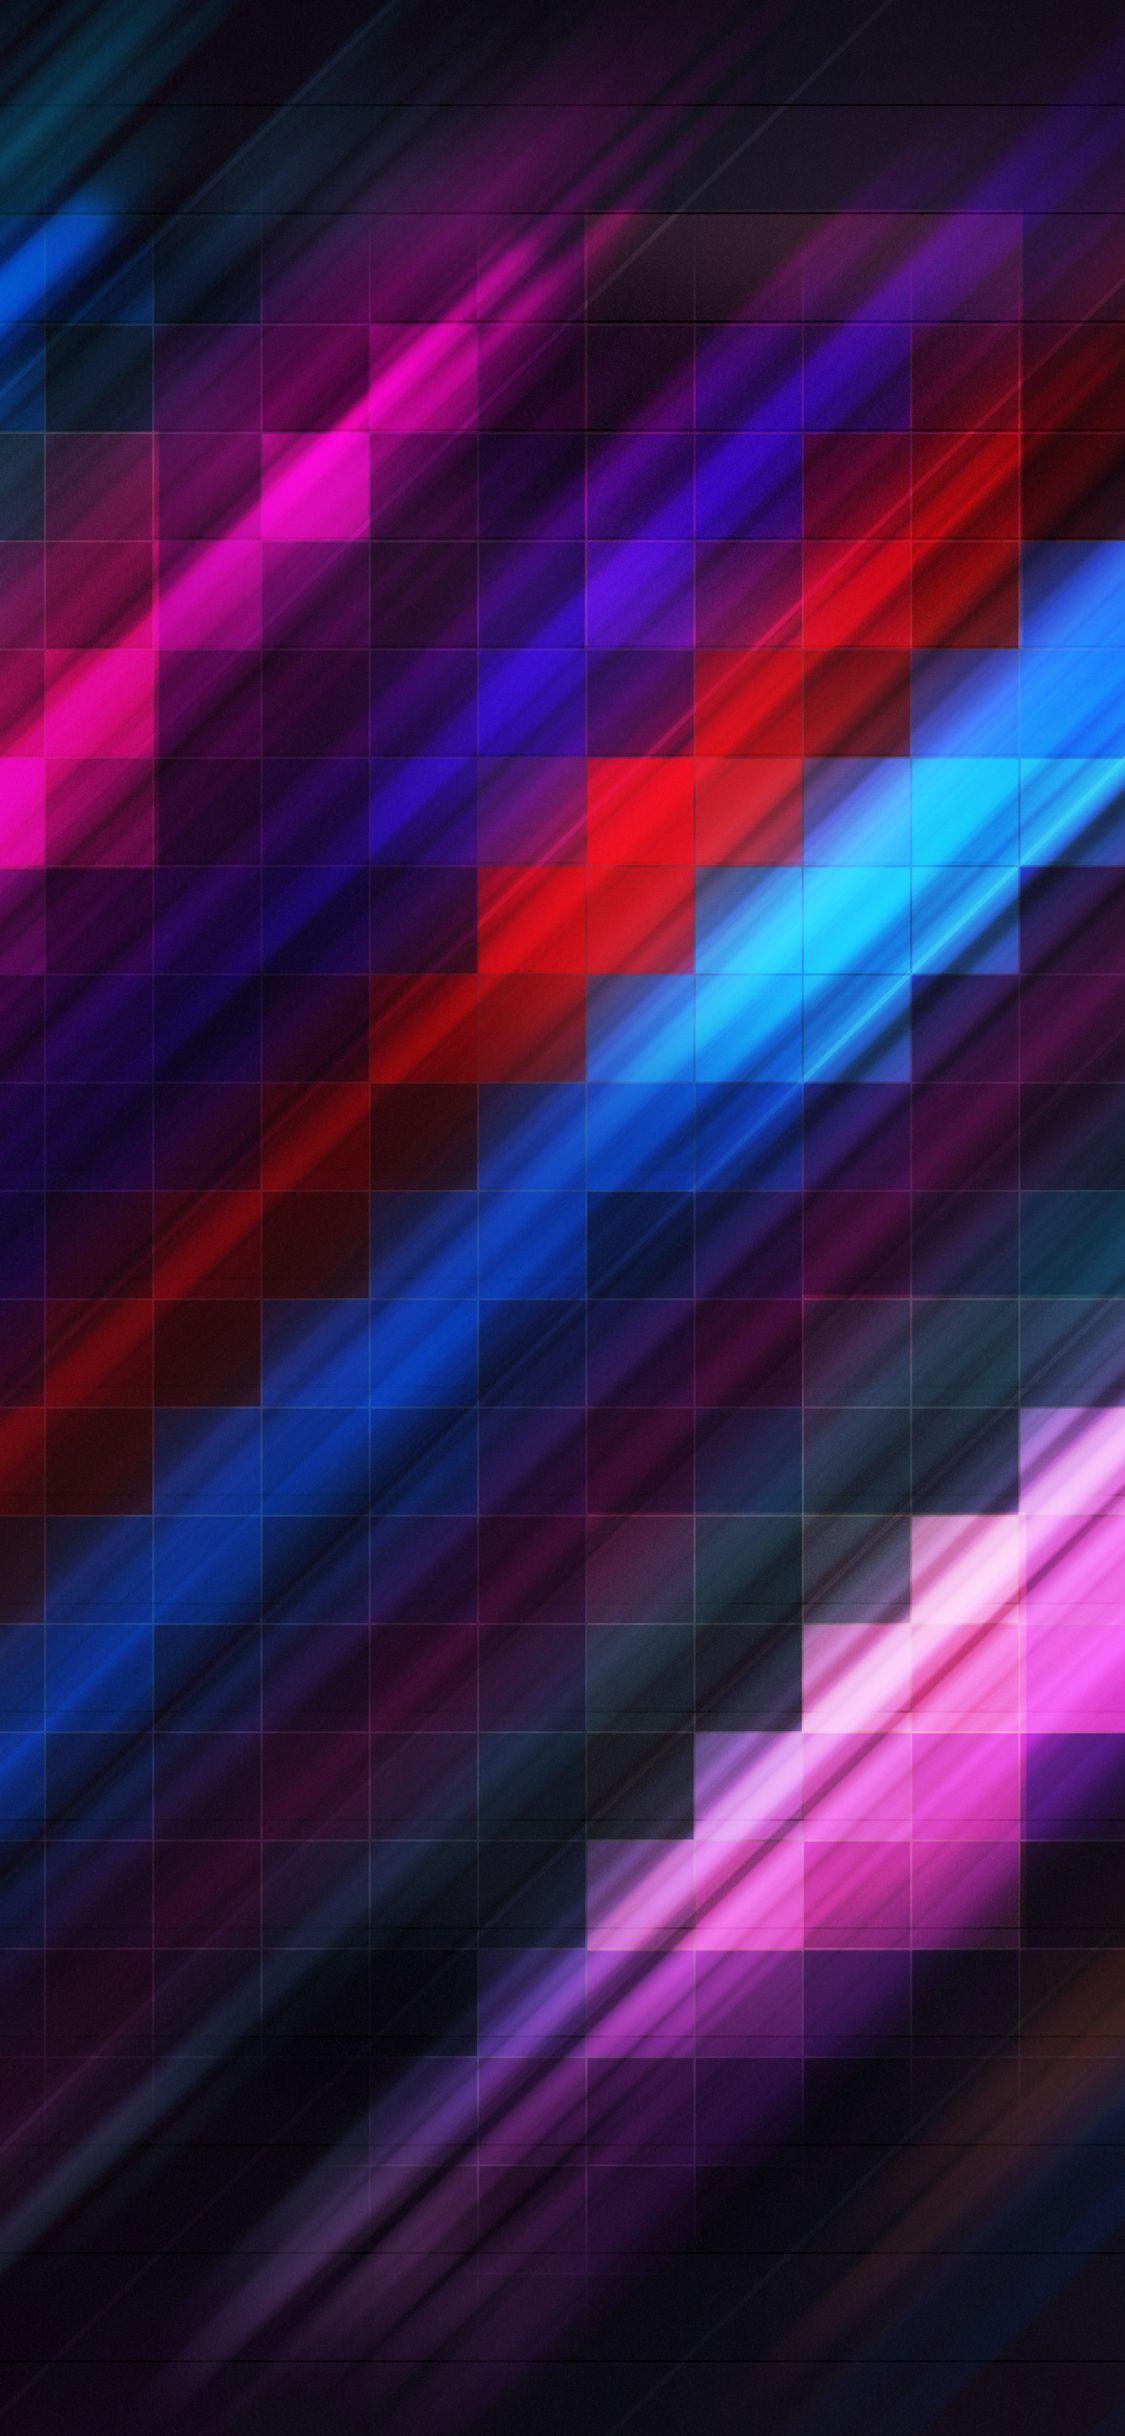 Grid Abstract Colorful 4k In 1125x2436 Resolution in 2019